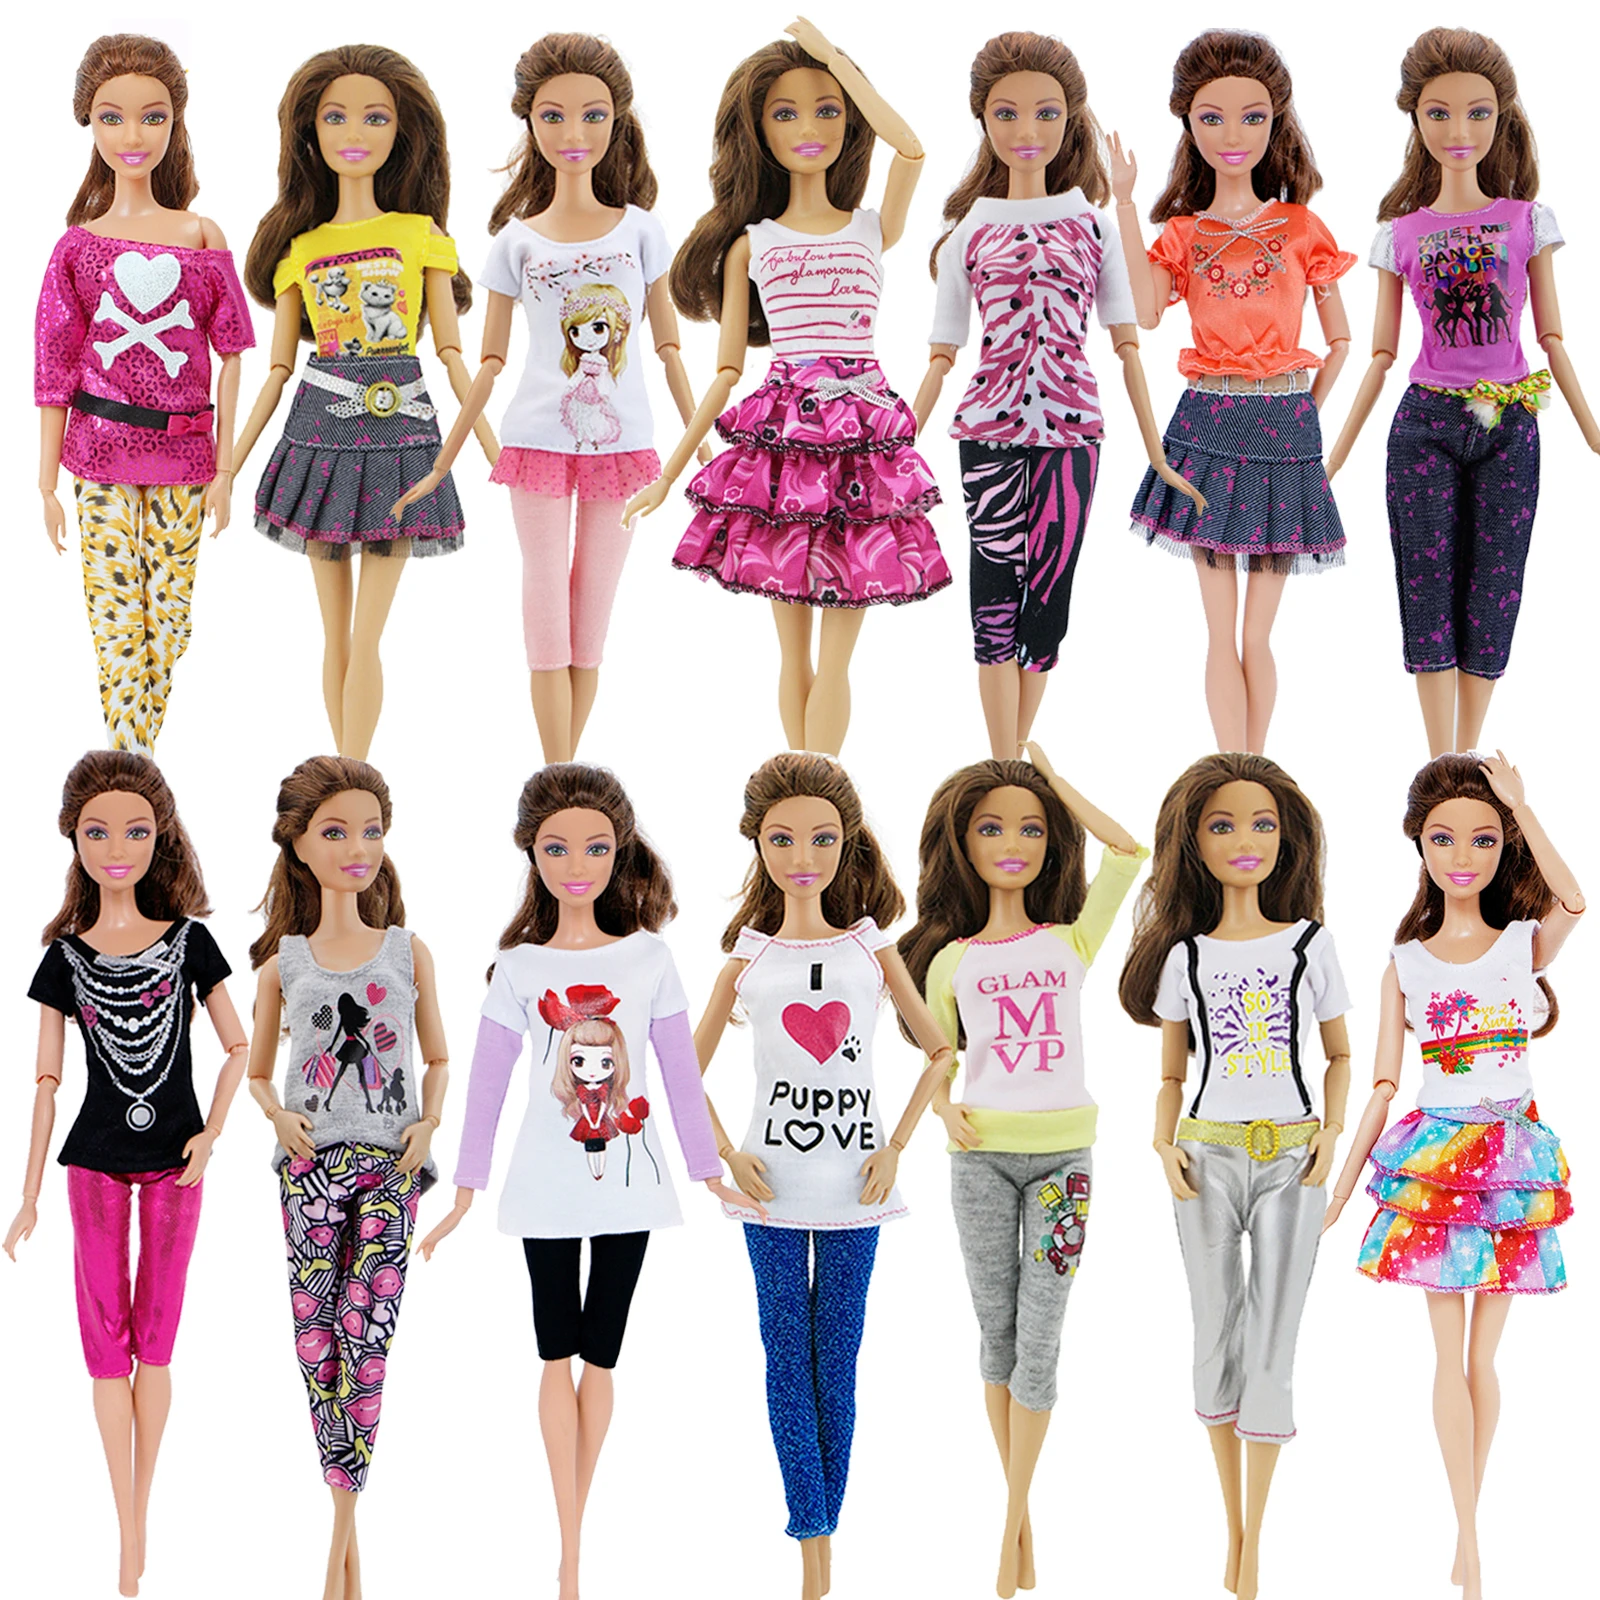 1x Fashion Mix Style Cute Doll Clothes Dress Daily Casual Skirt Shirt  Blouse Pants Clothes for Barbie Doll Accessories Girl Toys|Dolls  Accessories| - AliExpress